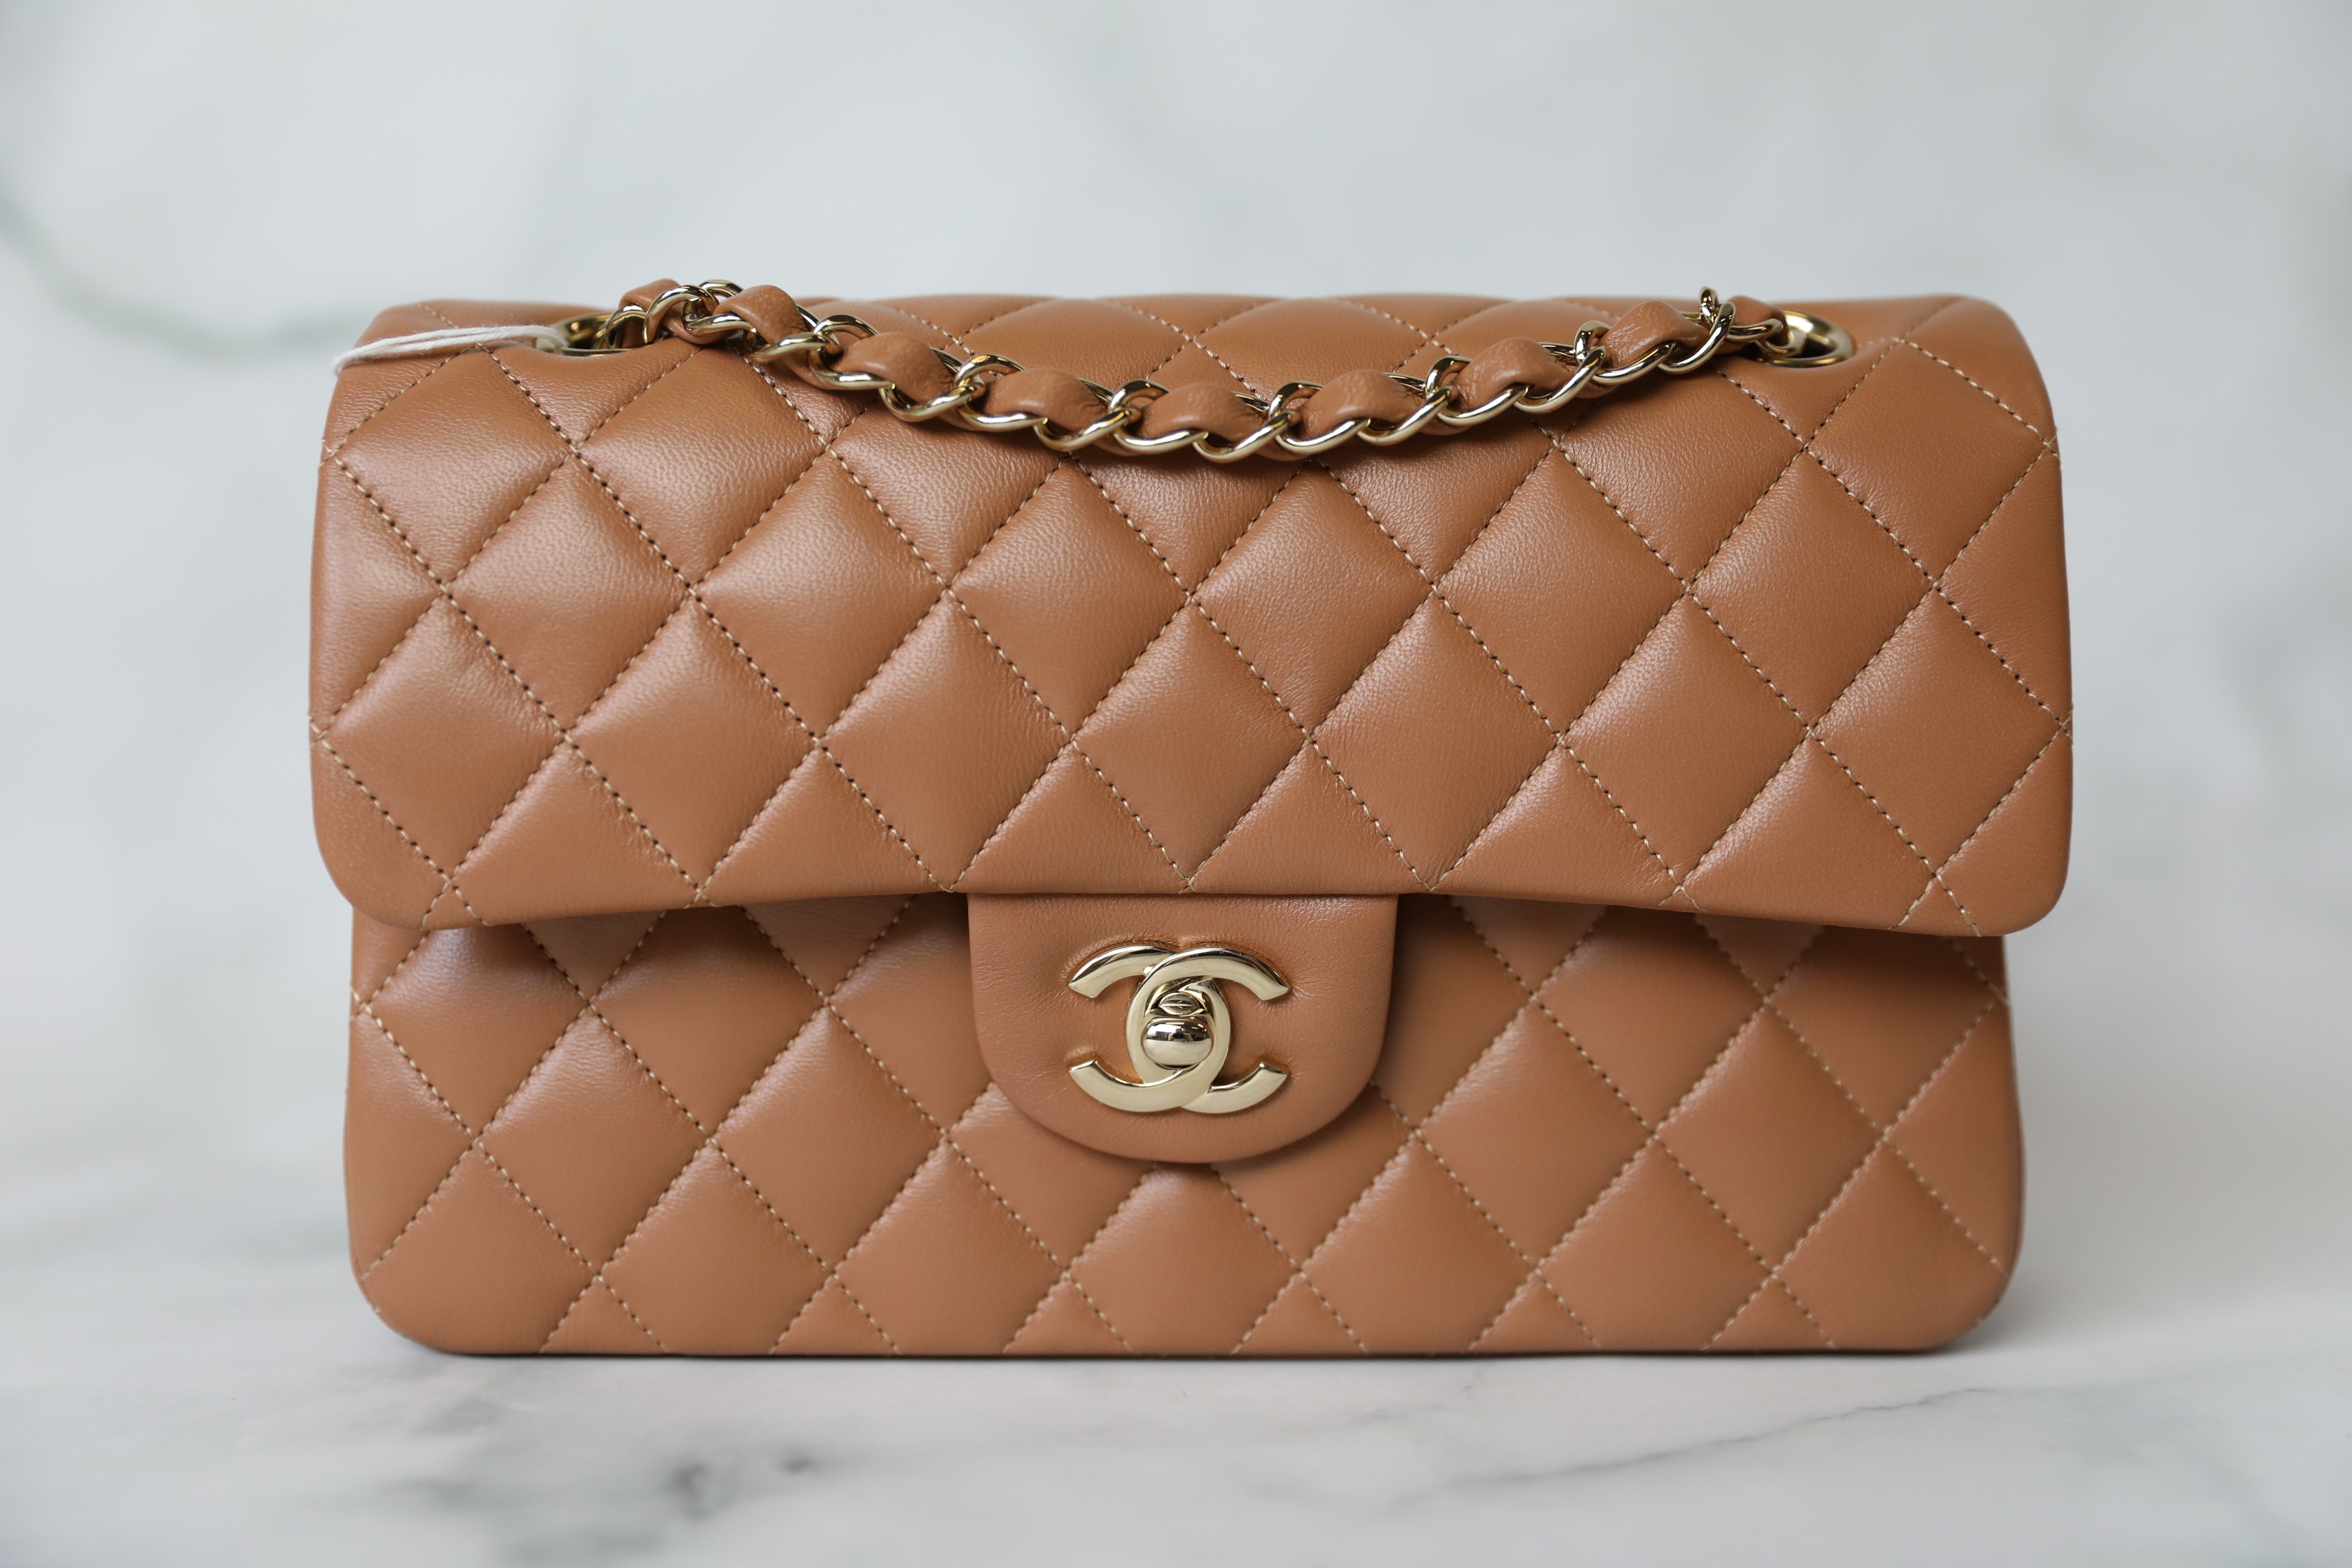 Chanel Classic Medium, Caramel Brown Lambskin with Gold Hardware, Preowned  in Box WA001